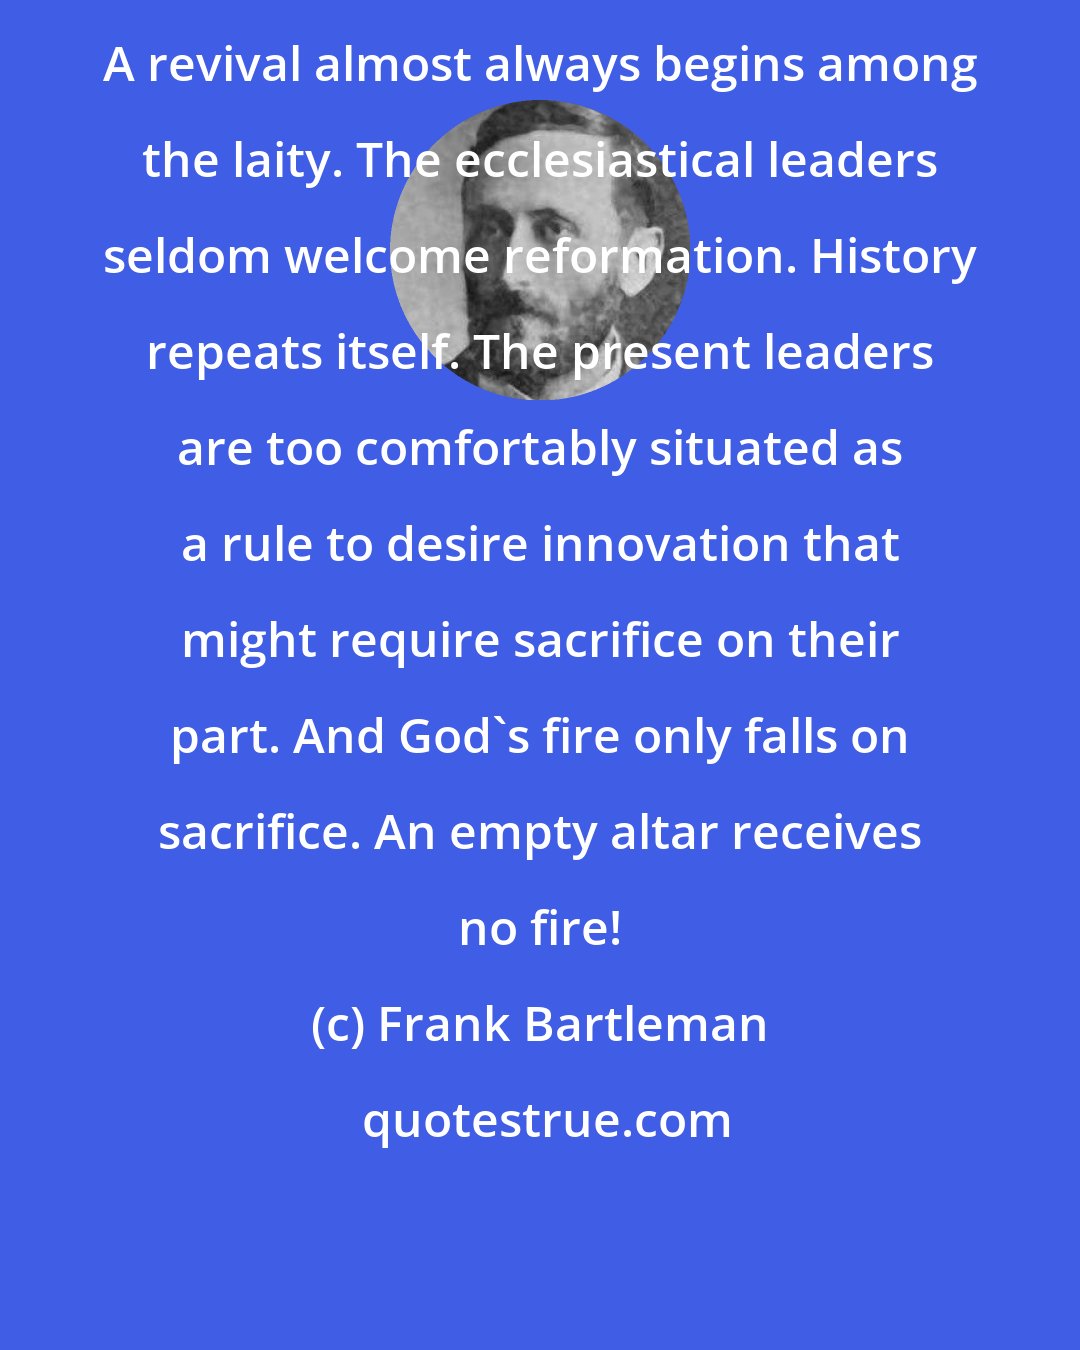 Frank Bartleman: A revival almost always begins among the laity. The ecclesiastical leaders seldom welcome reformation. History repeats itself. The present leaders are too comfortably situated as a rule to desire innovation that might require sacrifice on their part. And God's fire only falls on sacrifice. An empty altar receives no fire!